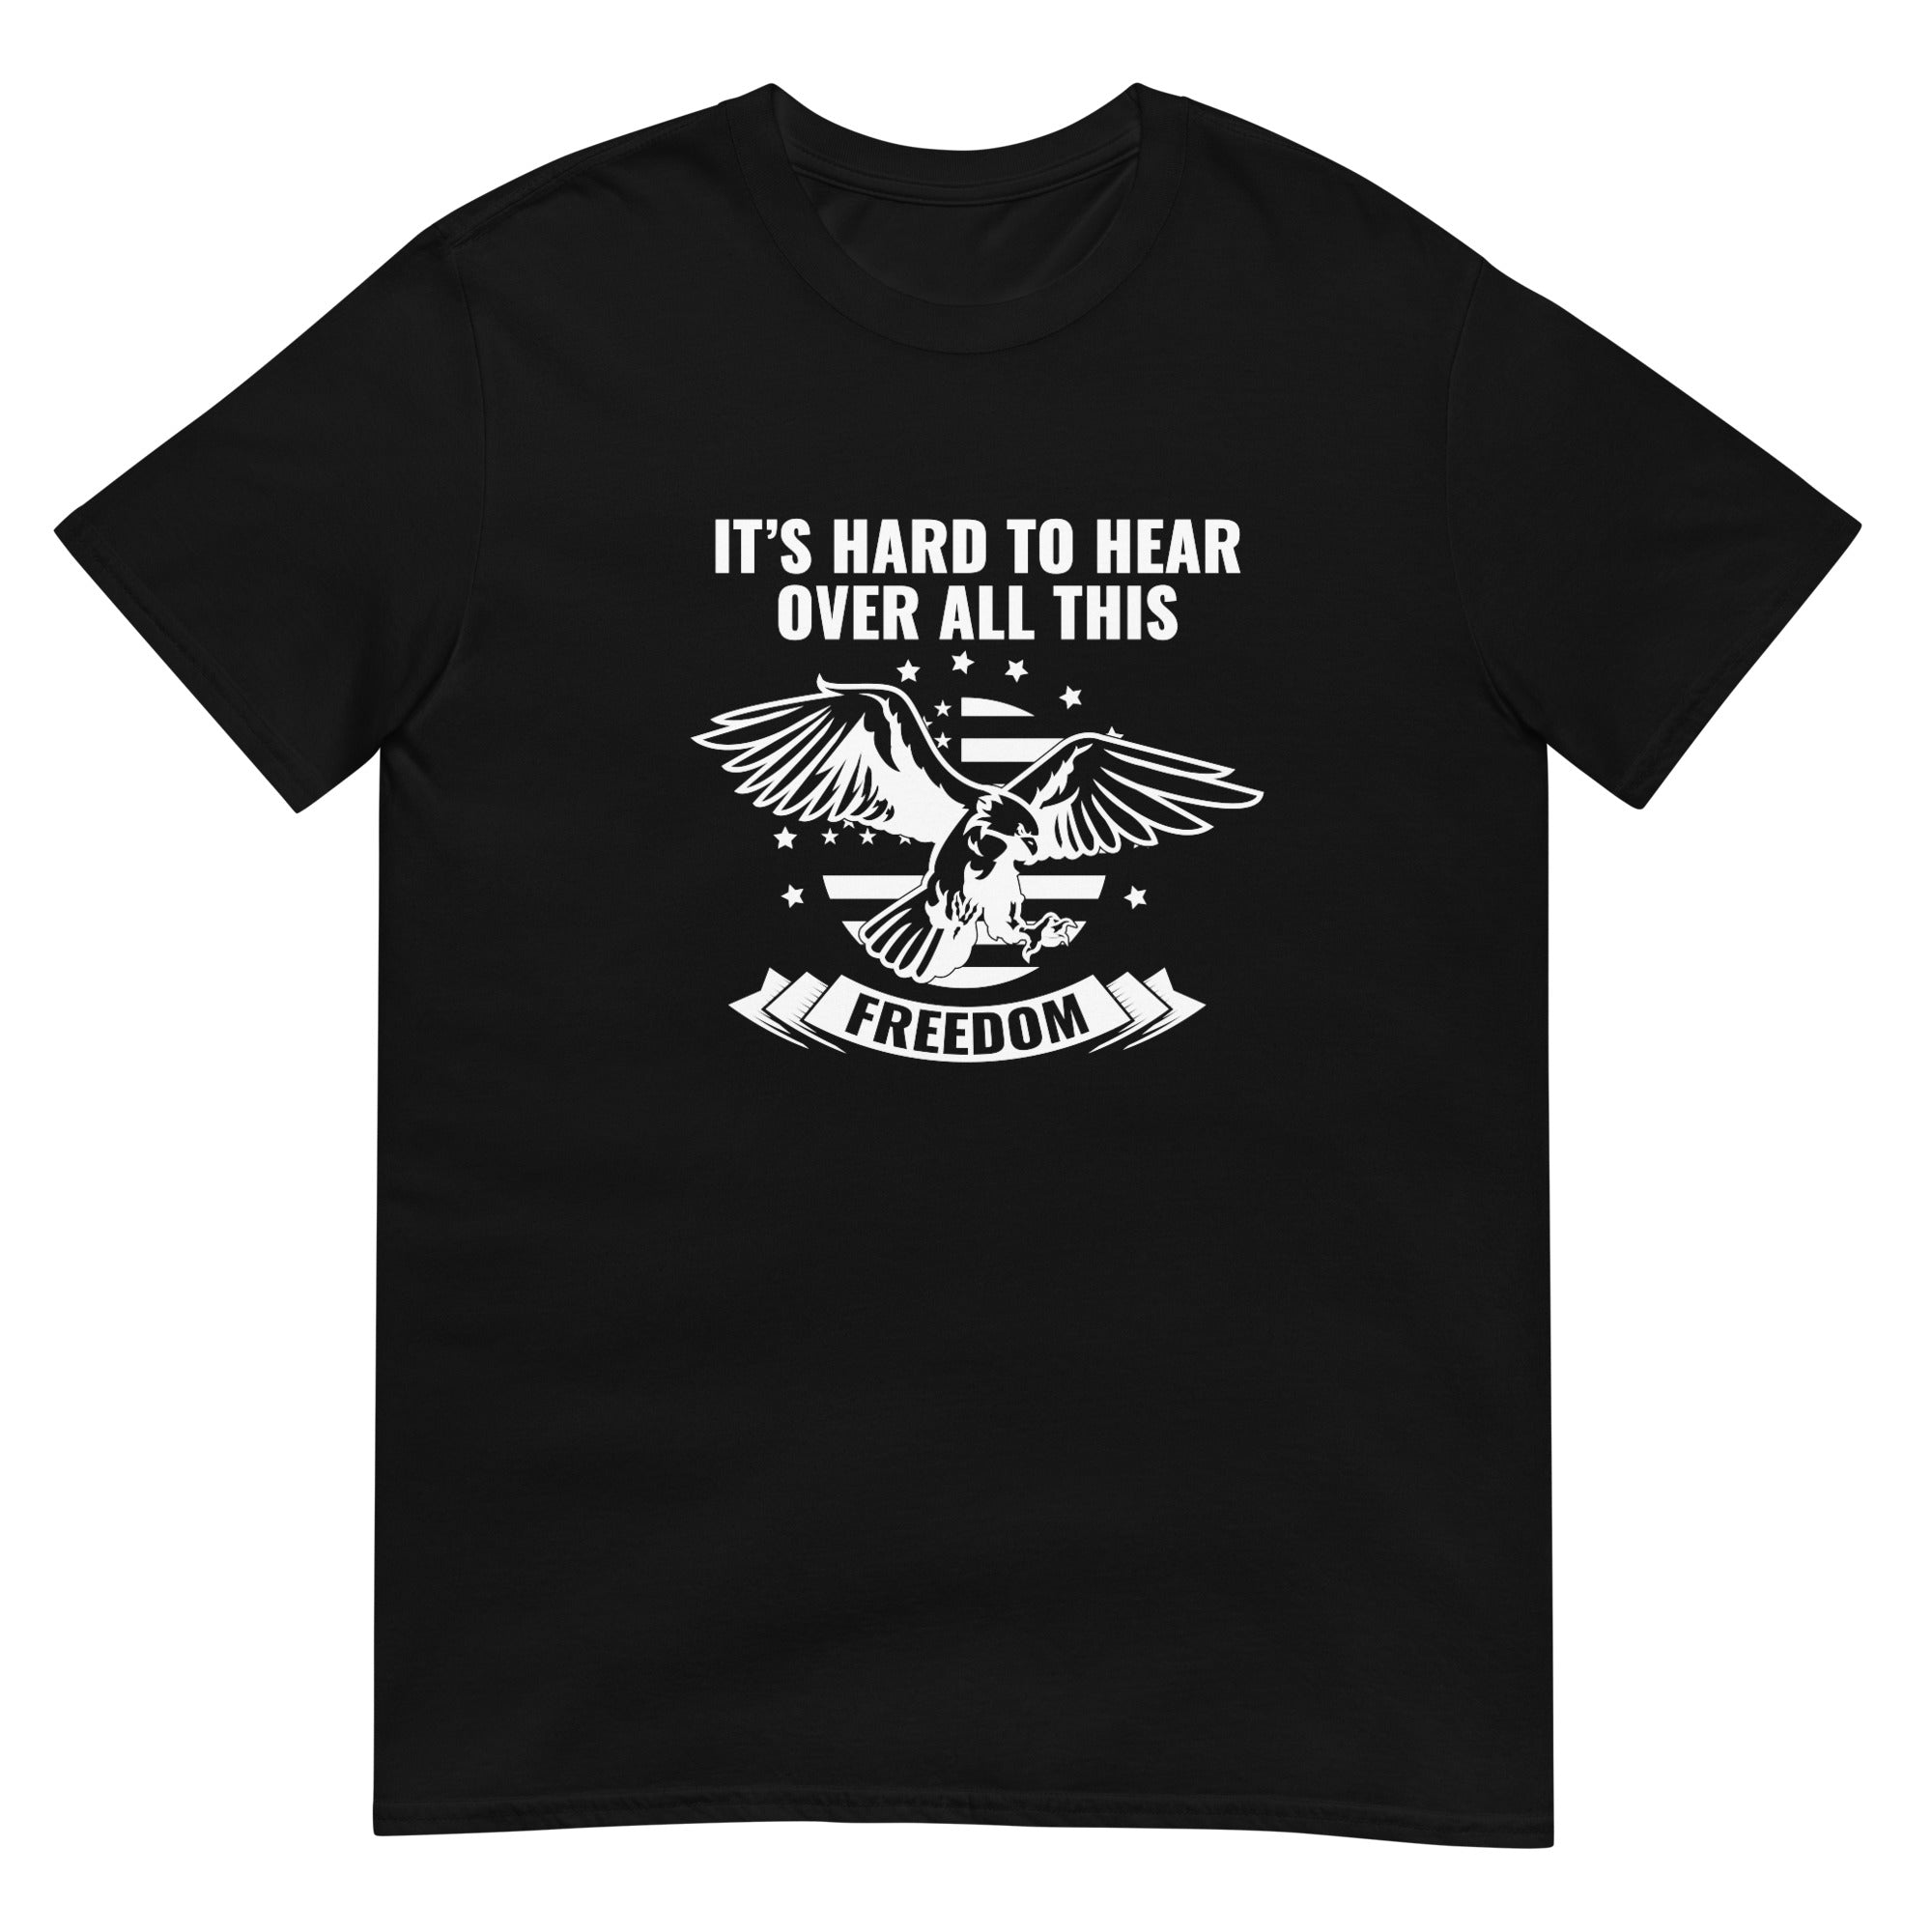 All This Freedom Short-Sleeve Unisex T-Shirt